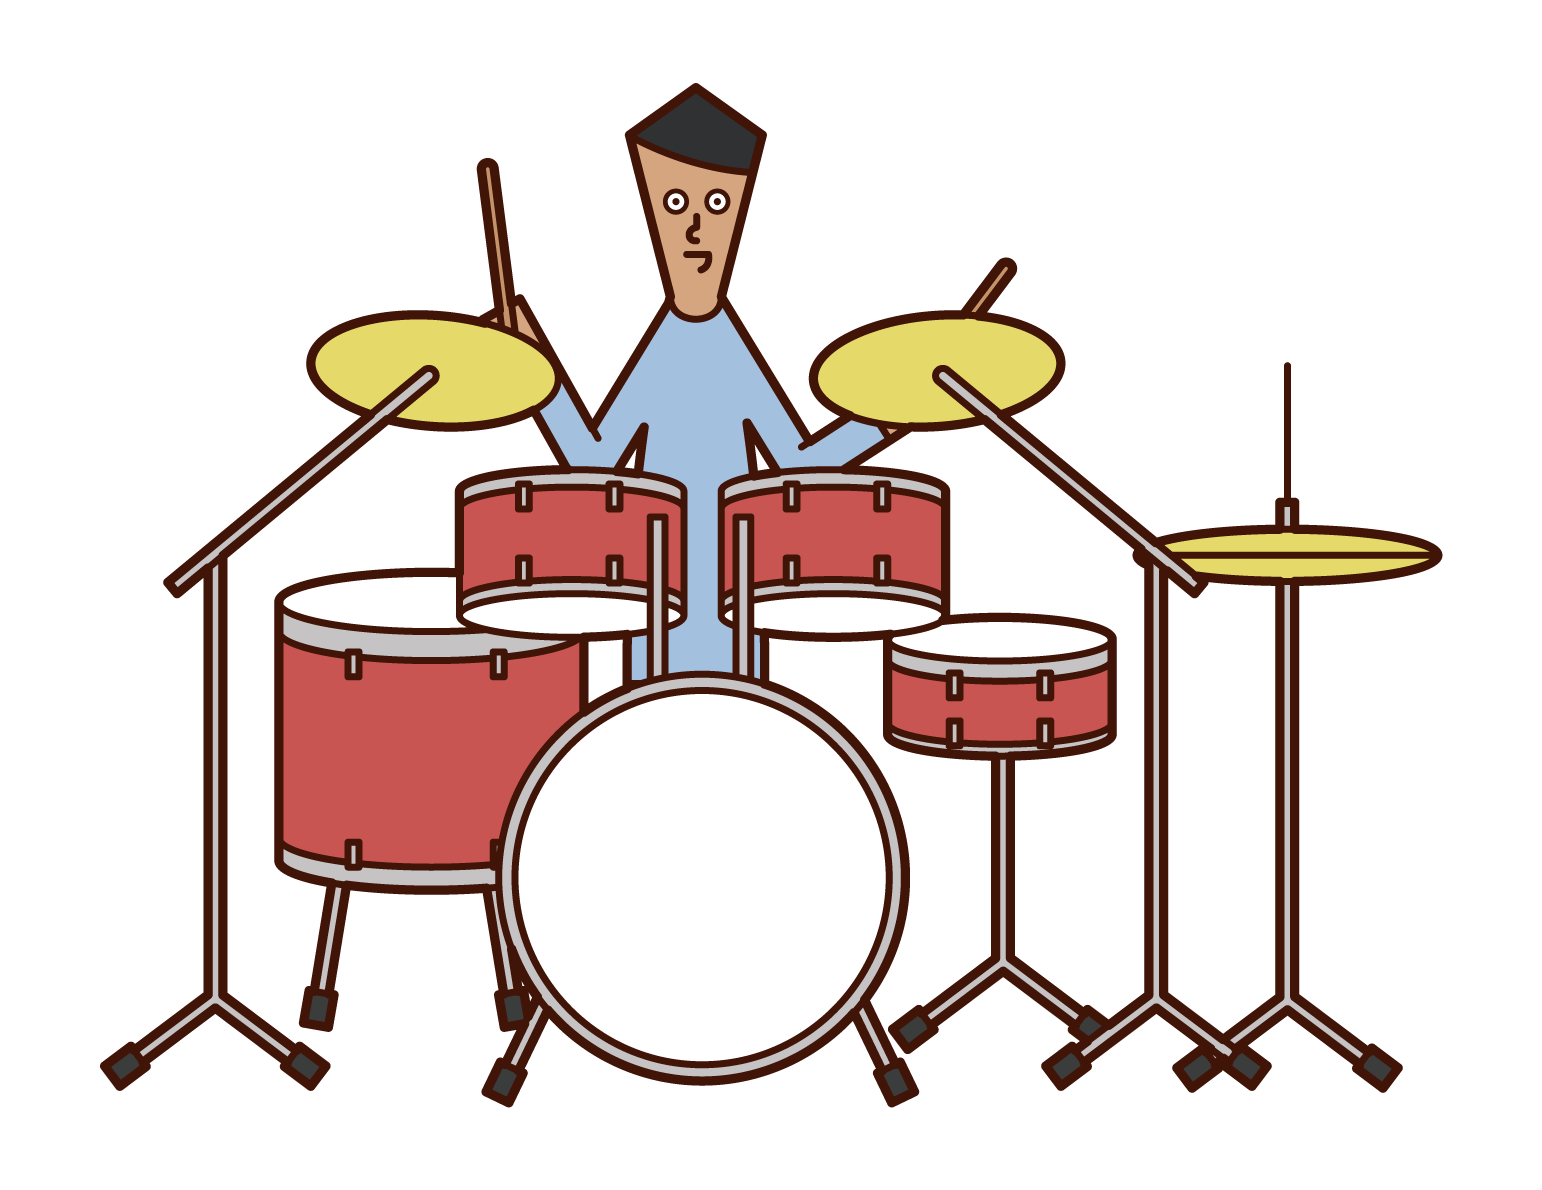 Illustration of a man playing drums